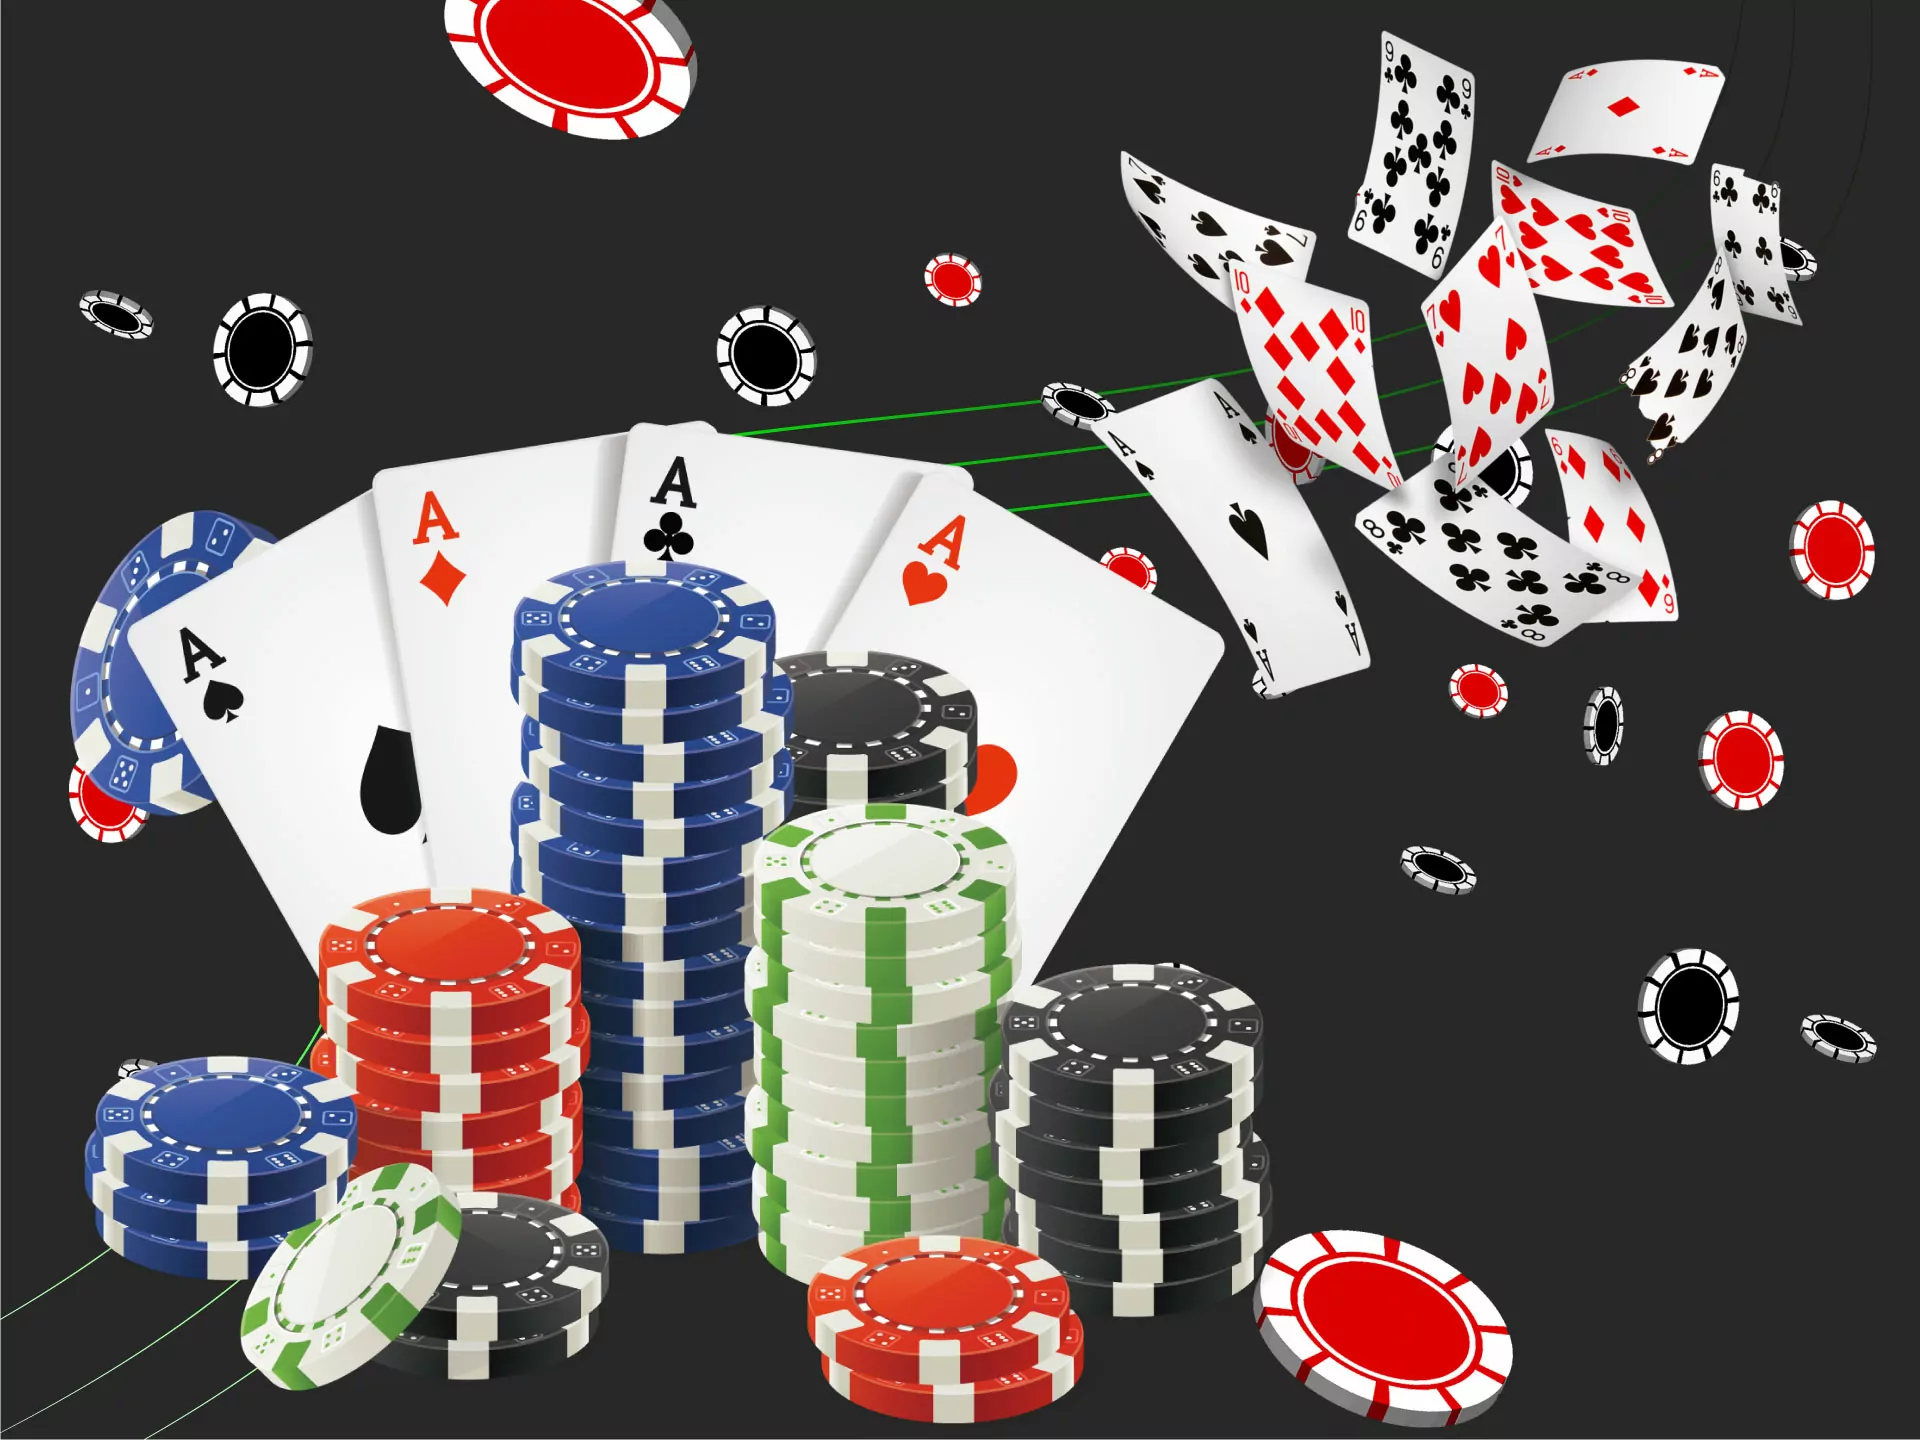 Texas Holdem is the most popular poker type.